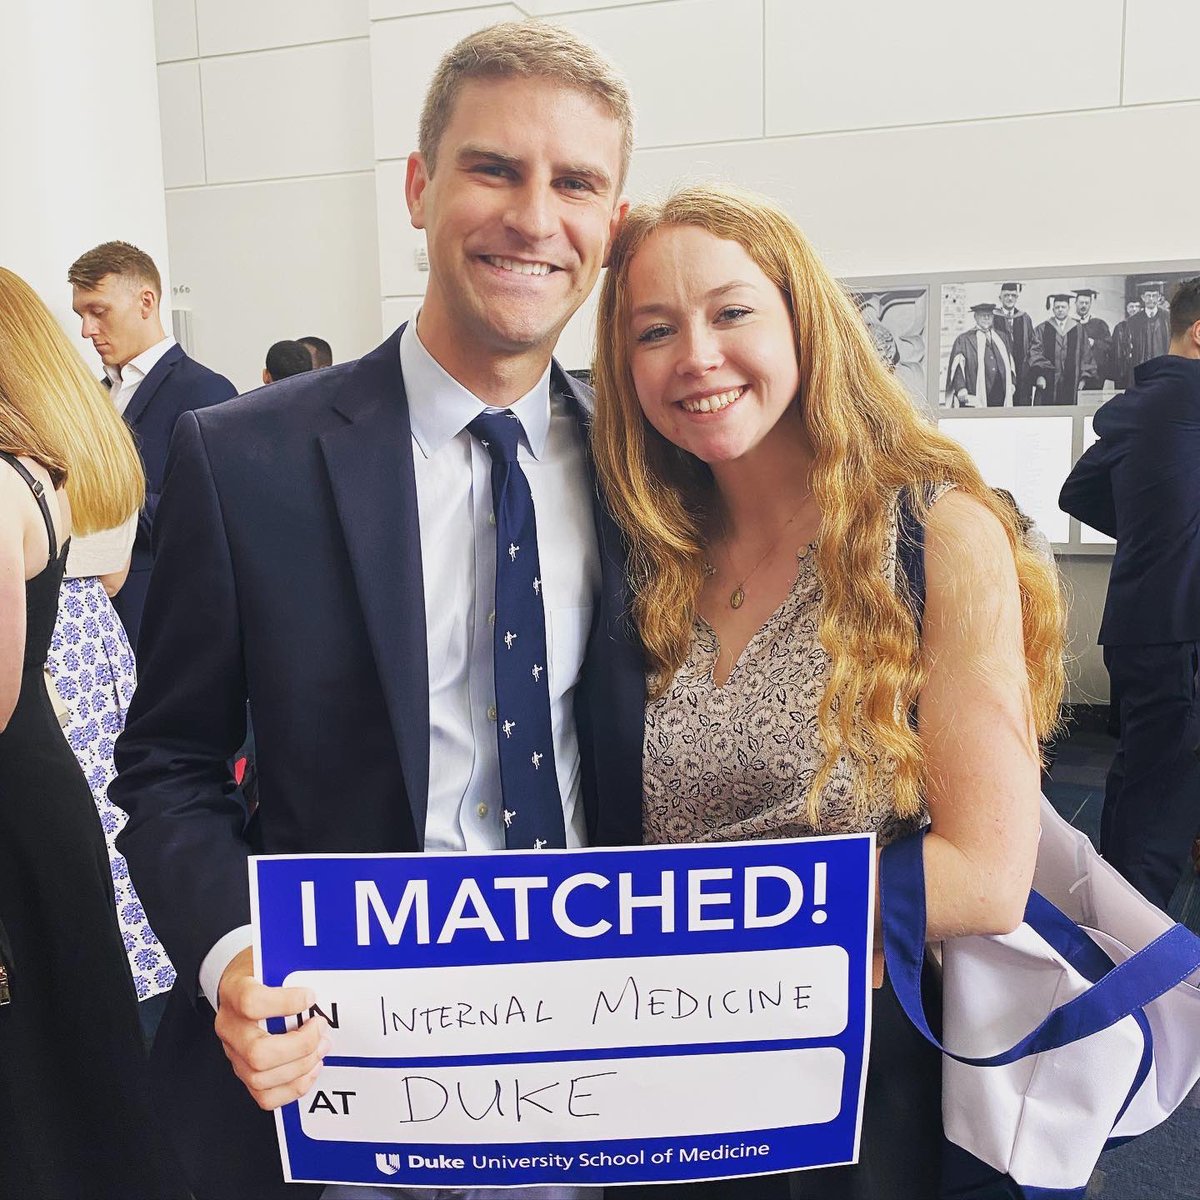 Thrilled beyond belief to be joining the legendary #DukeFam at @IMResidencyDuke! Thank you to all the family and mentors who have supported me, too many to list here, without whom none of this would be possible 😈💙🩺
@AimeeZaas #Match2024 #MatchDay #InternalMedicine #ForeverDuke